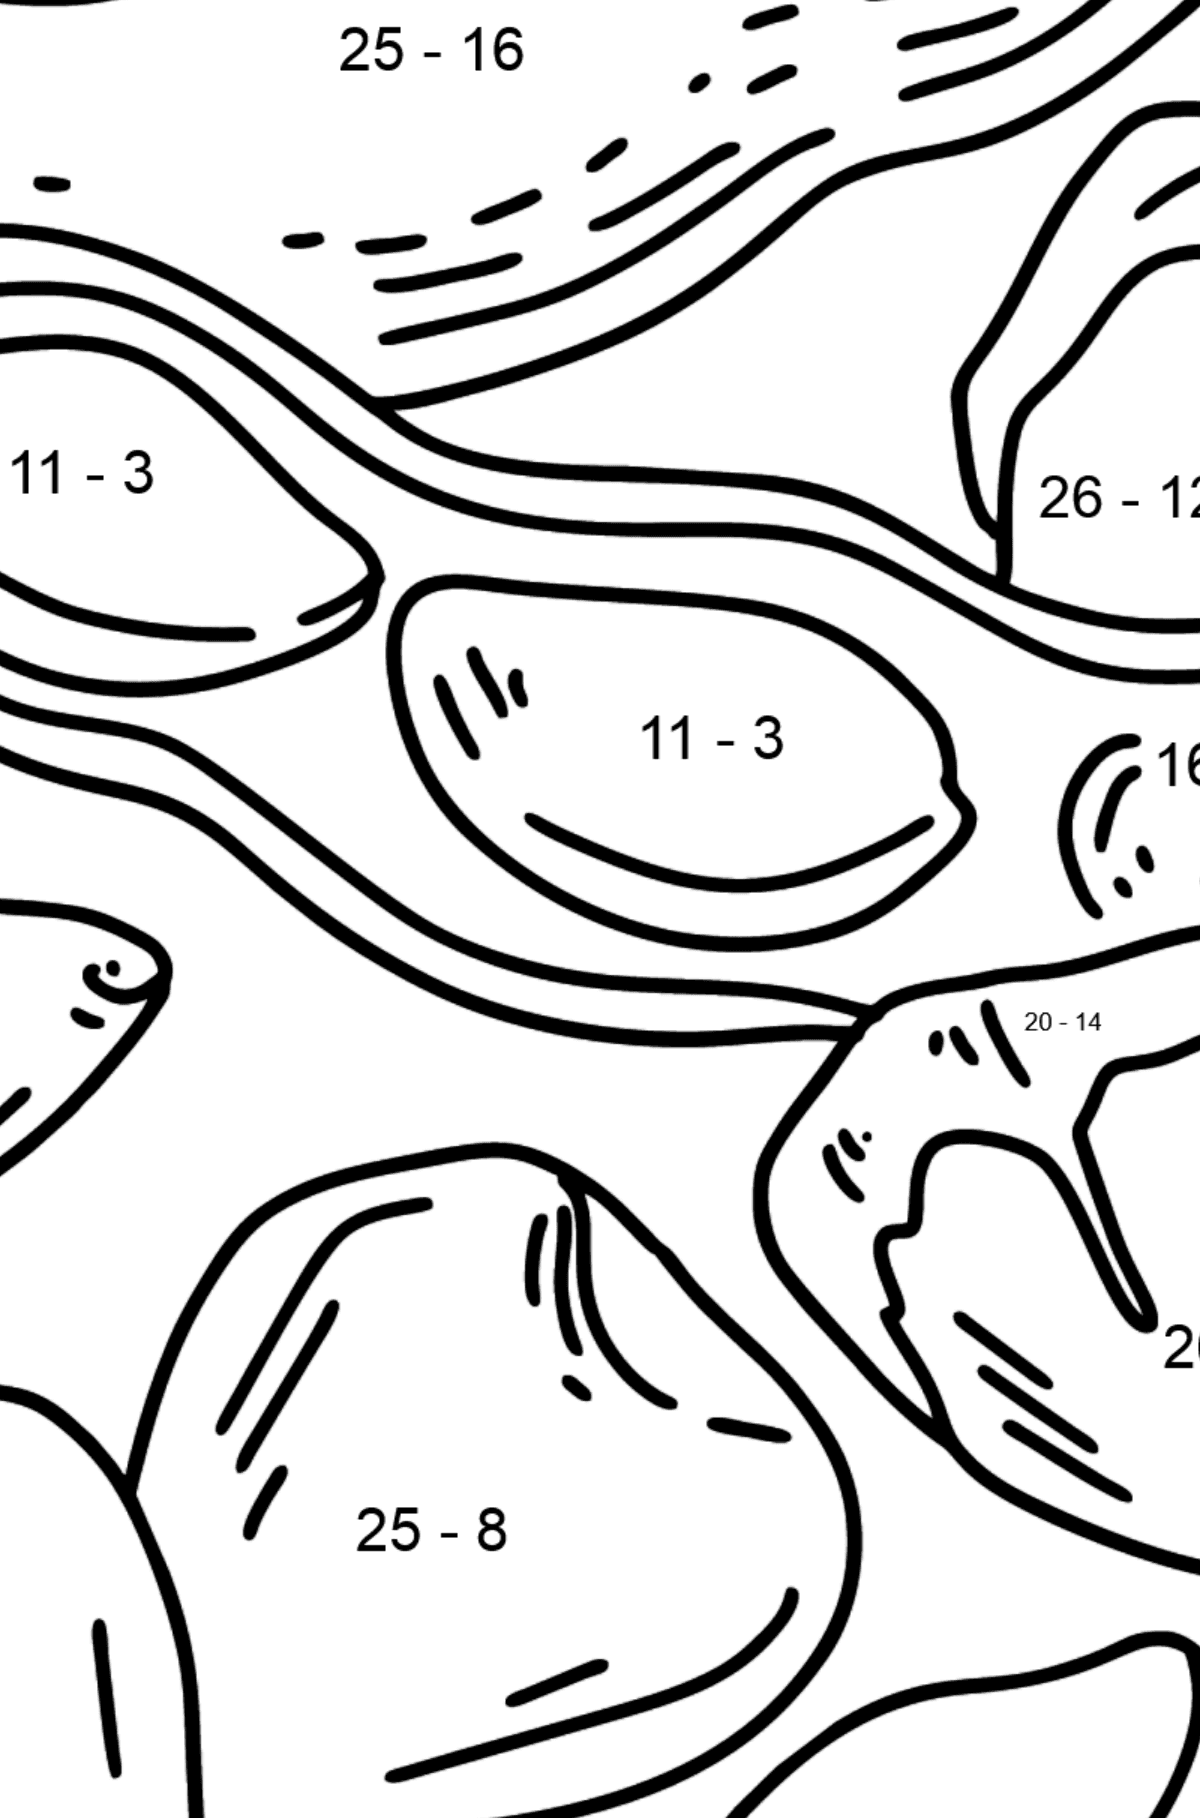 Nuts - Peanuts and Hazelnuts coloring page - Math Coloring - Subtraction for Kids